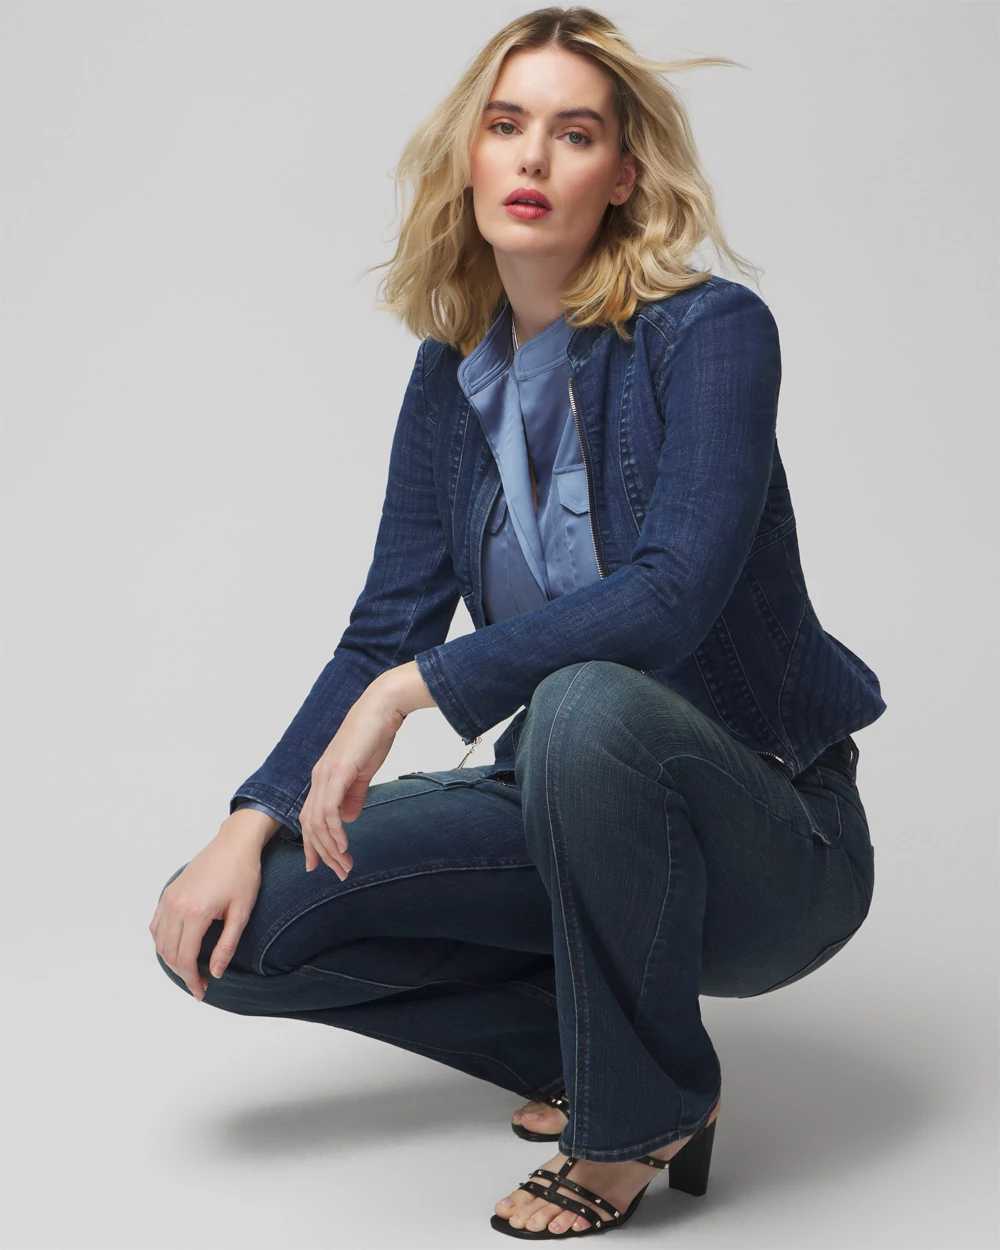 Curvy High-Rise Everyday Soft Denim  Cargo Skinny Flare Jeans click to view larger image.